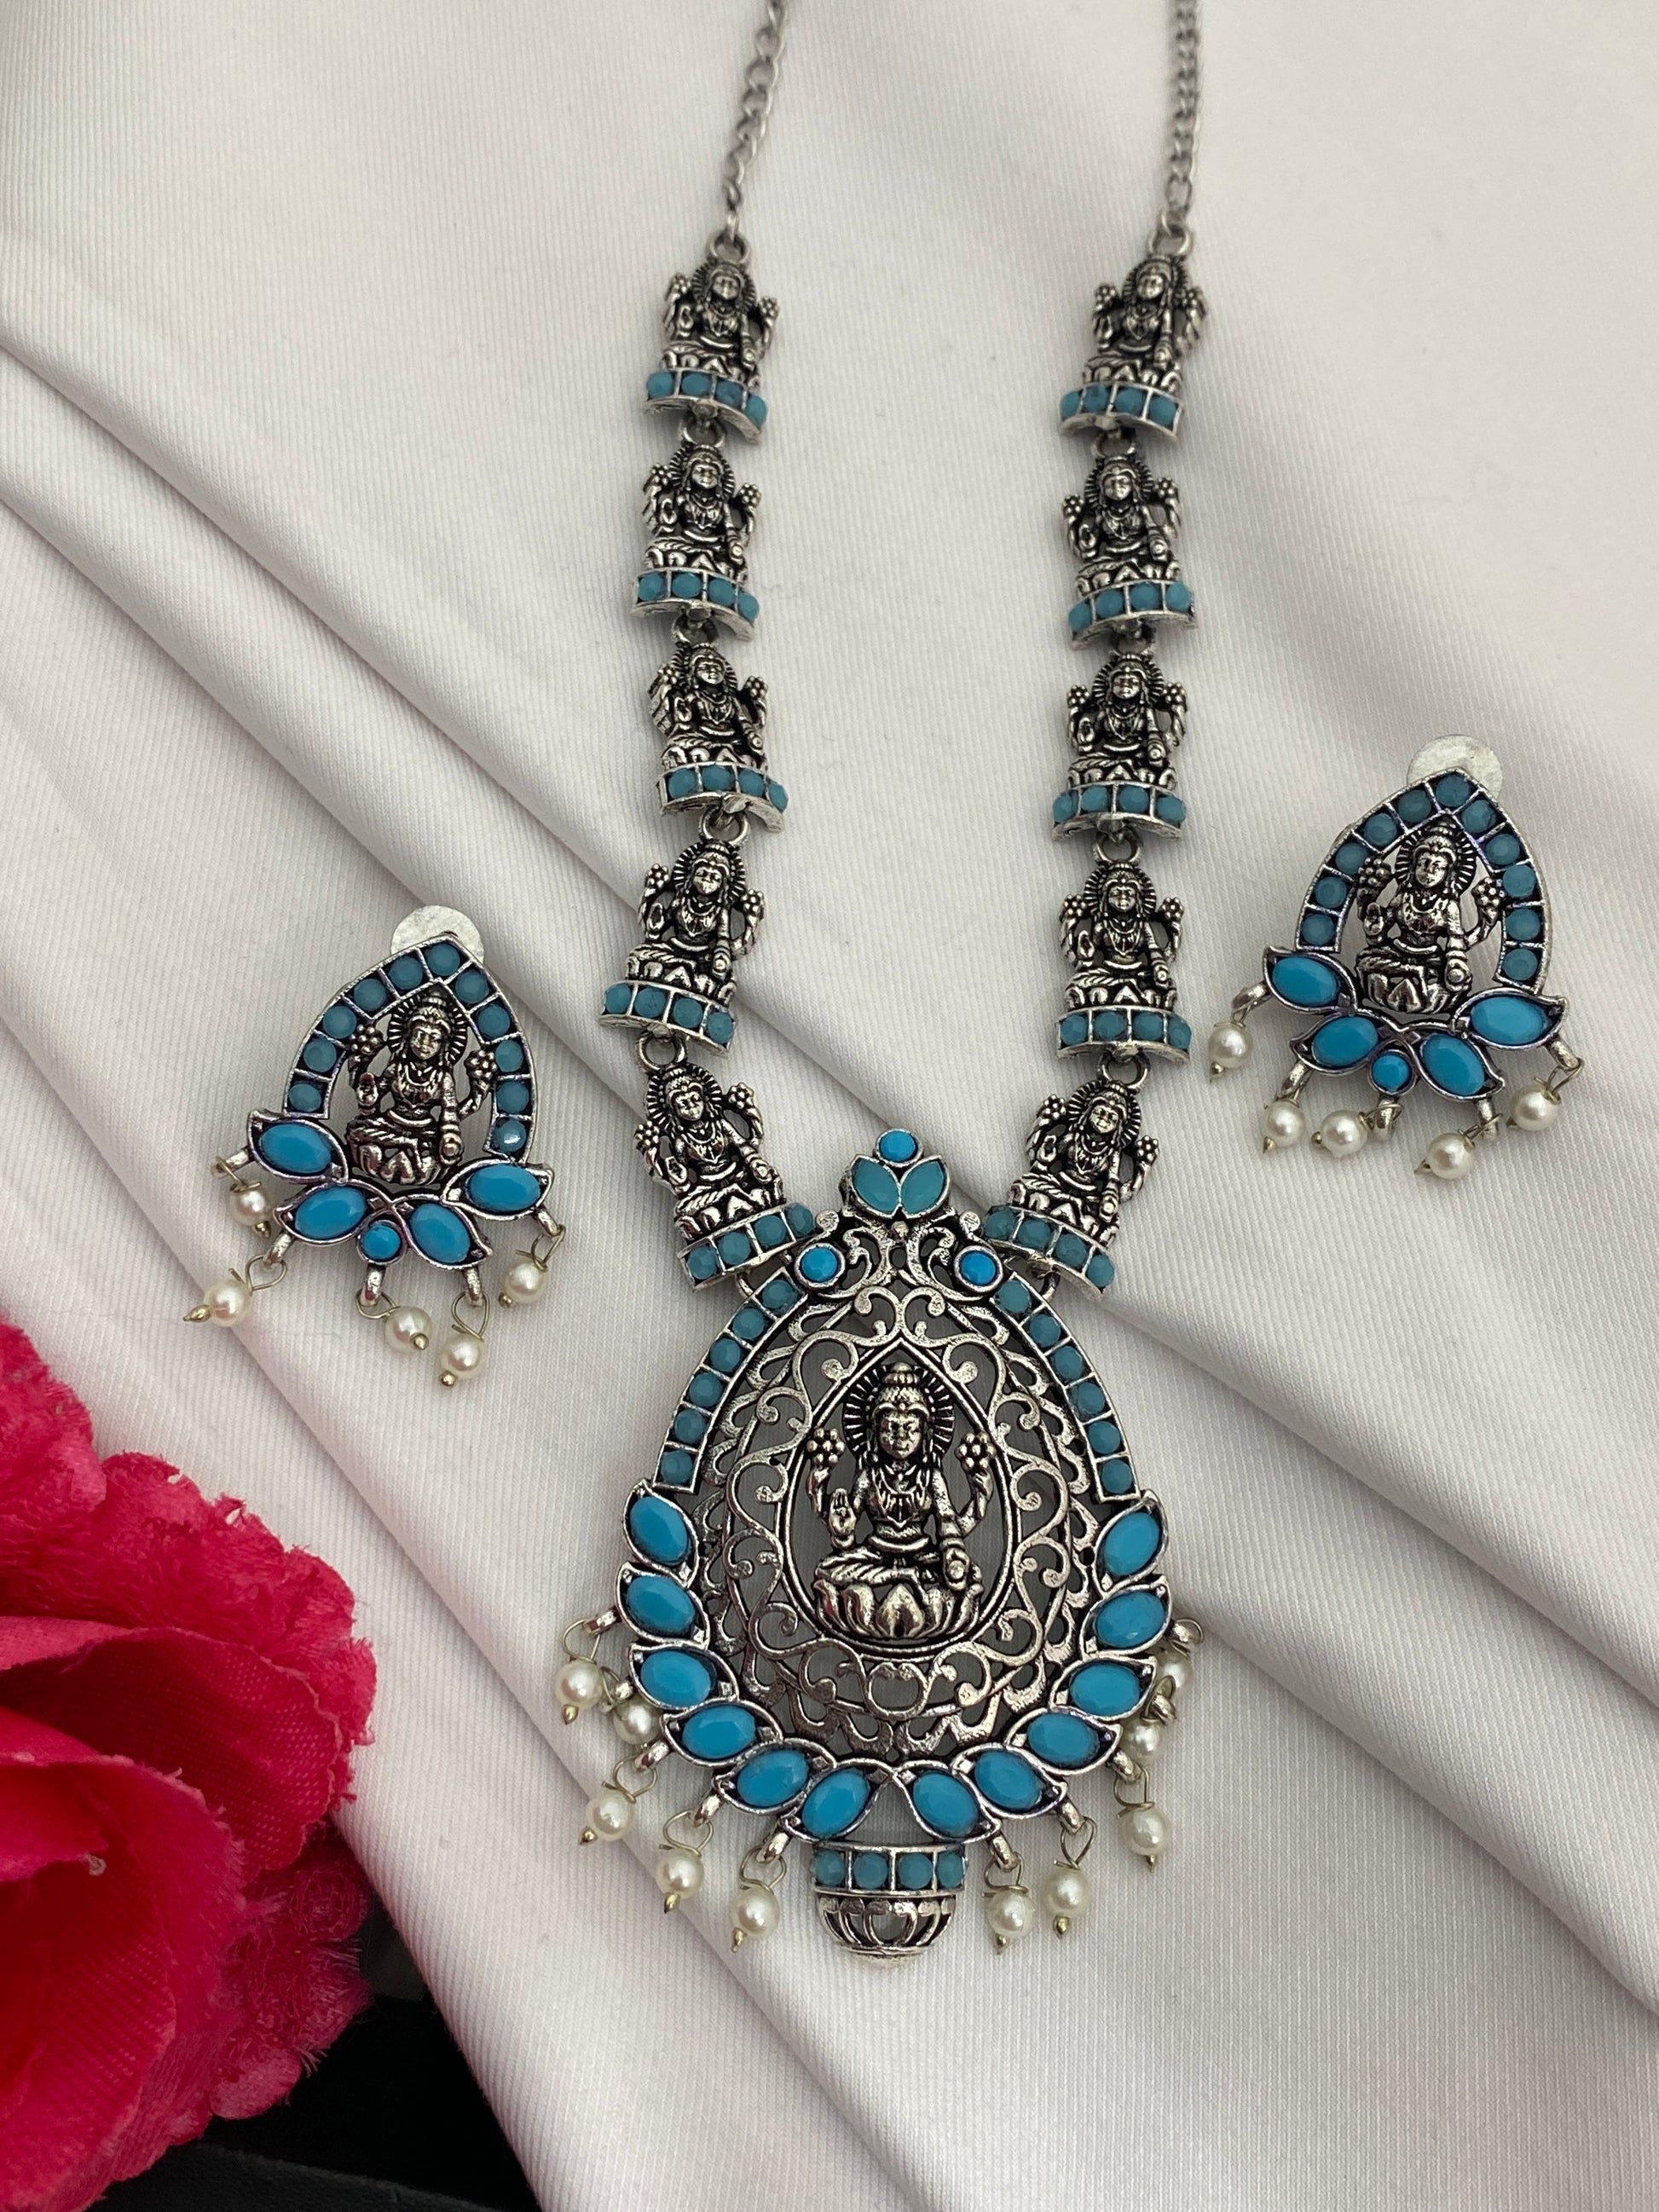 Blue Stone Studded Lakshmi Pendant Temple Jewelry Necklace Set in Paradise Valley